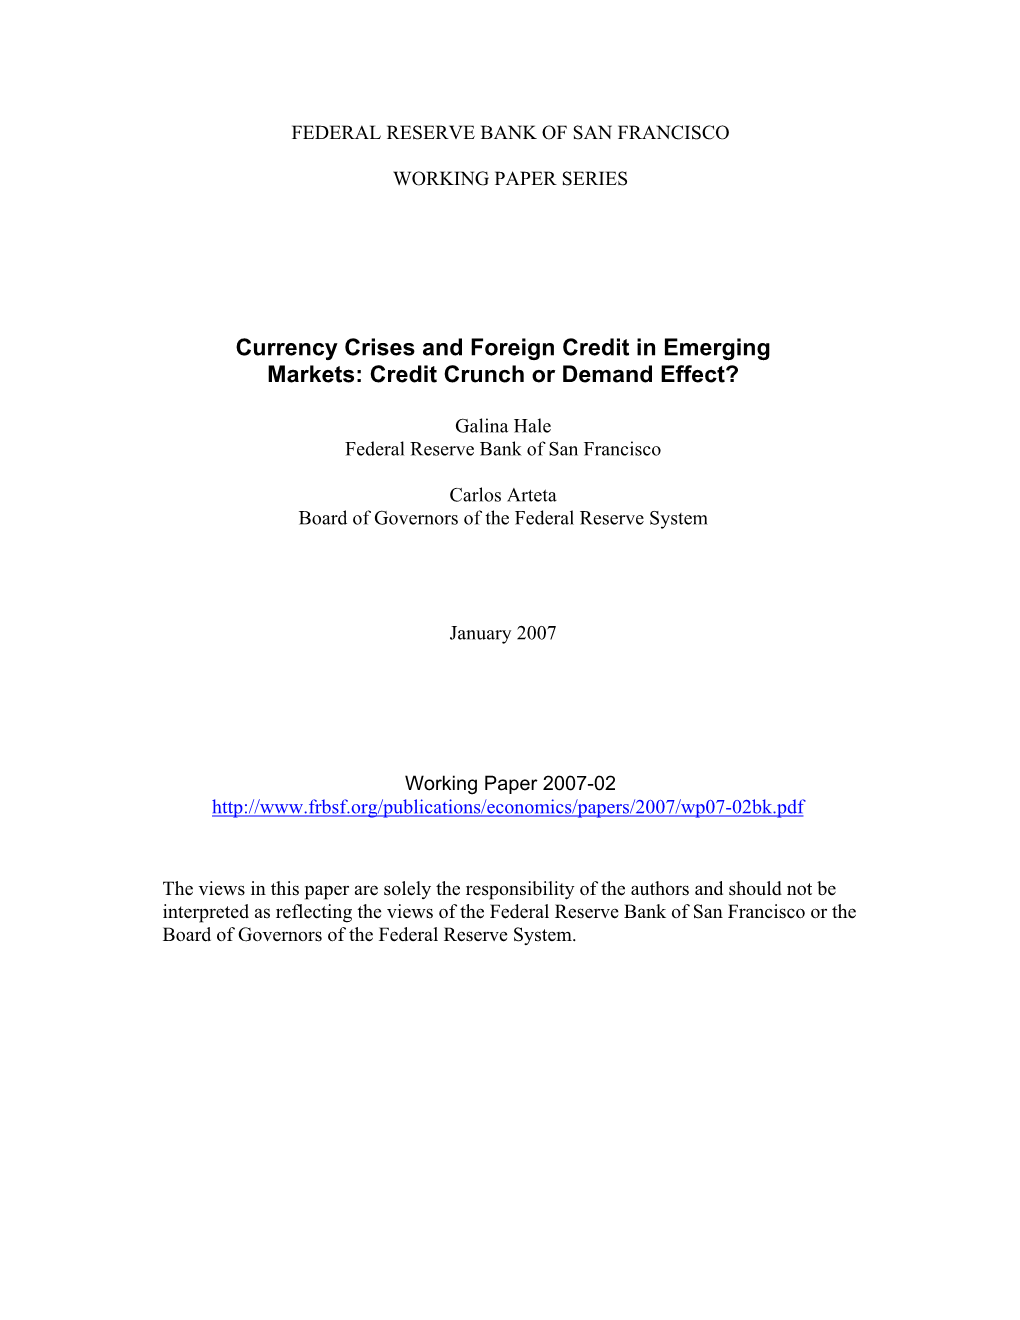 Currency Crises and Foreign Credit in Emerging Markets: Credit Crunch Or Demand Effect?